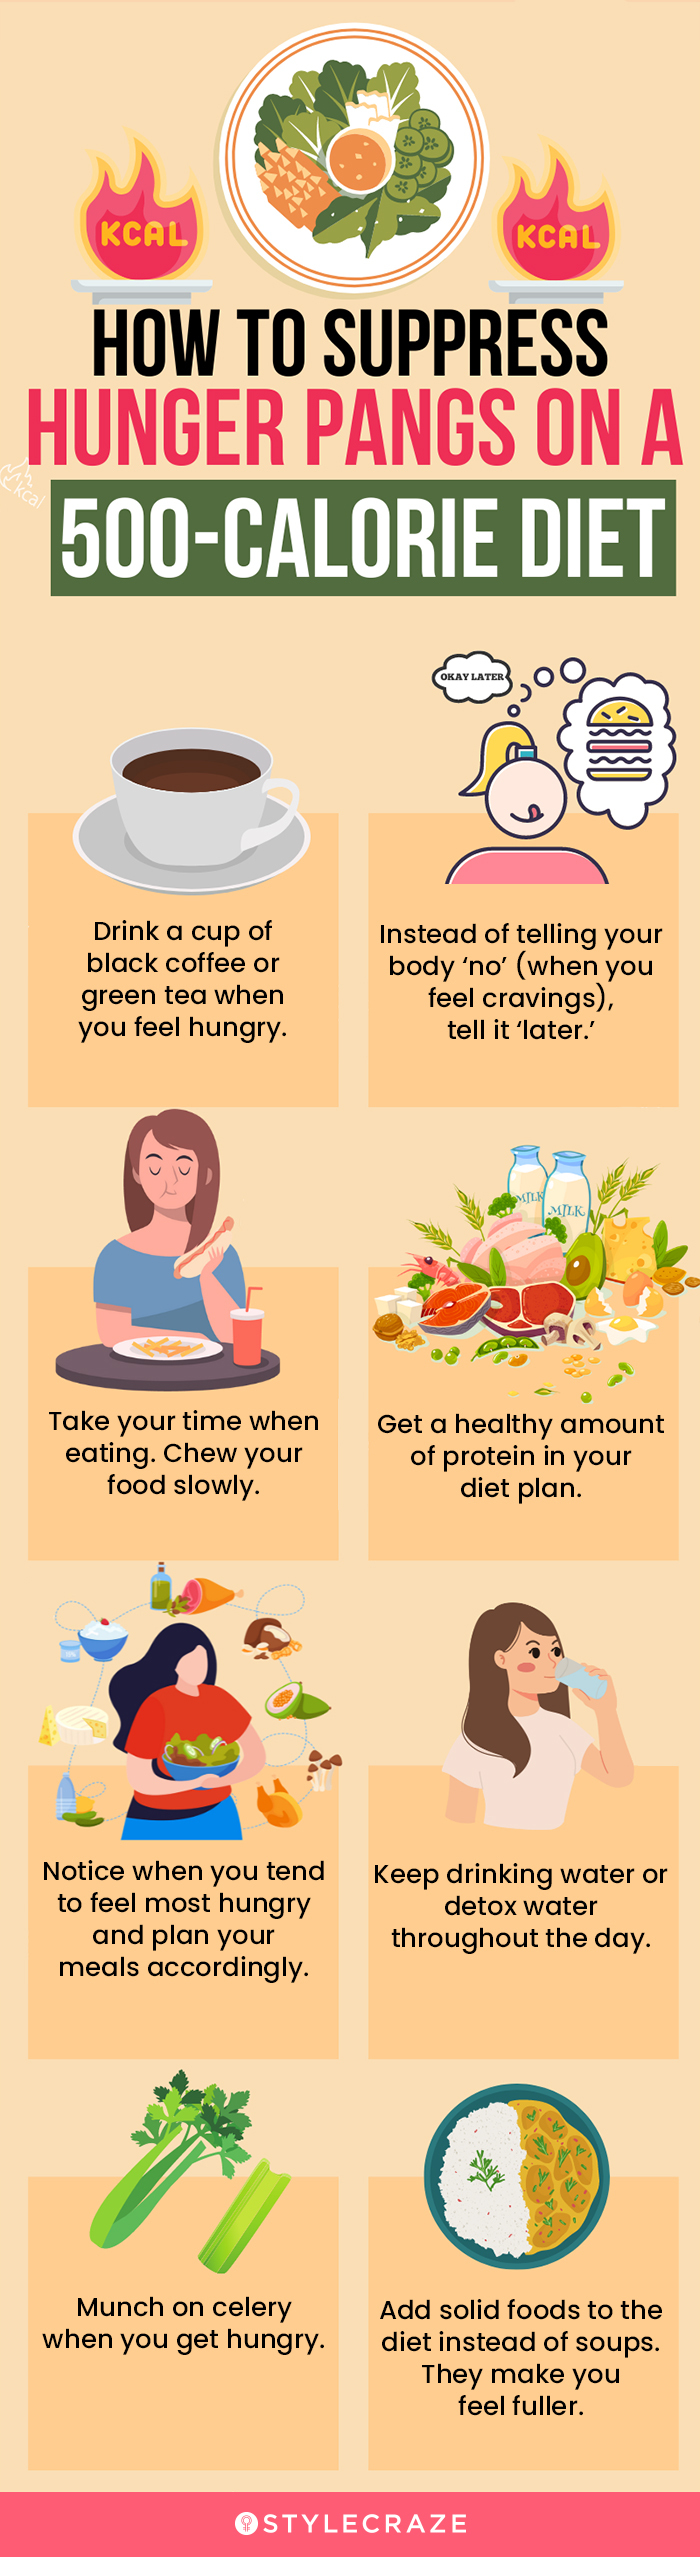 how to suppress hunger pangs on a 500-calorie diet [infographic]